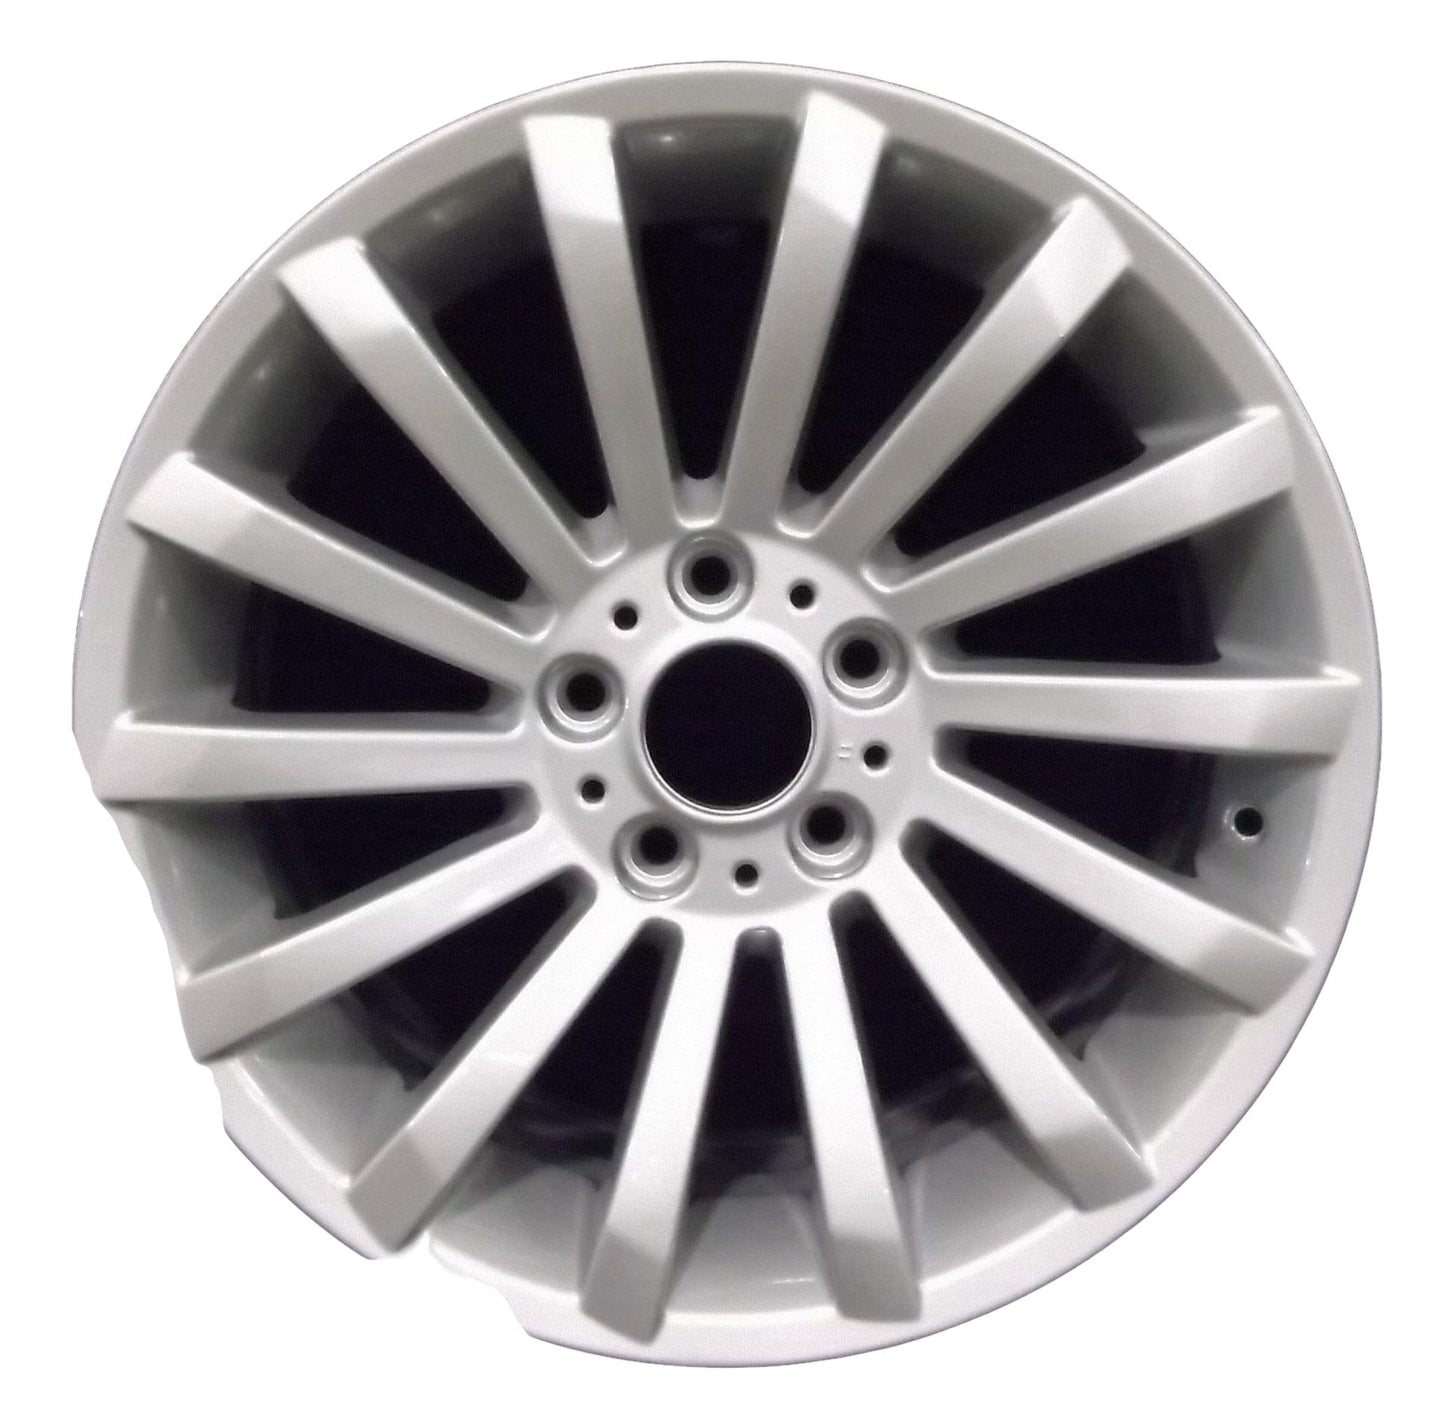 BMW 335i  2007, 2008, 2009, 2010, 2011, 2012, 2013 Factory OEM Car Wheel Size 18x8 Alloy WAO.59596FT.PS10.FF